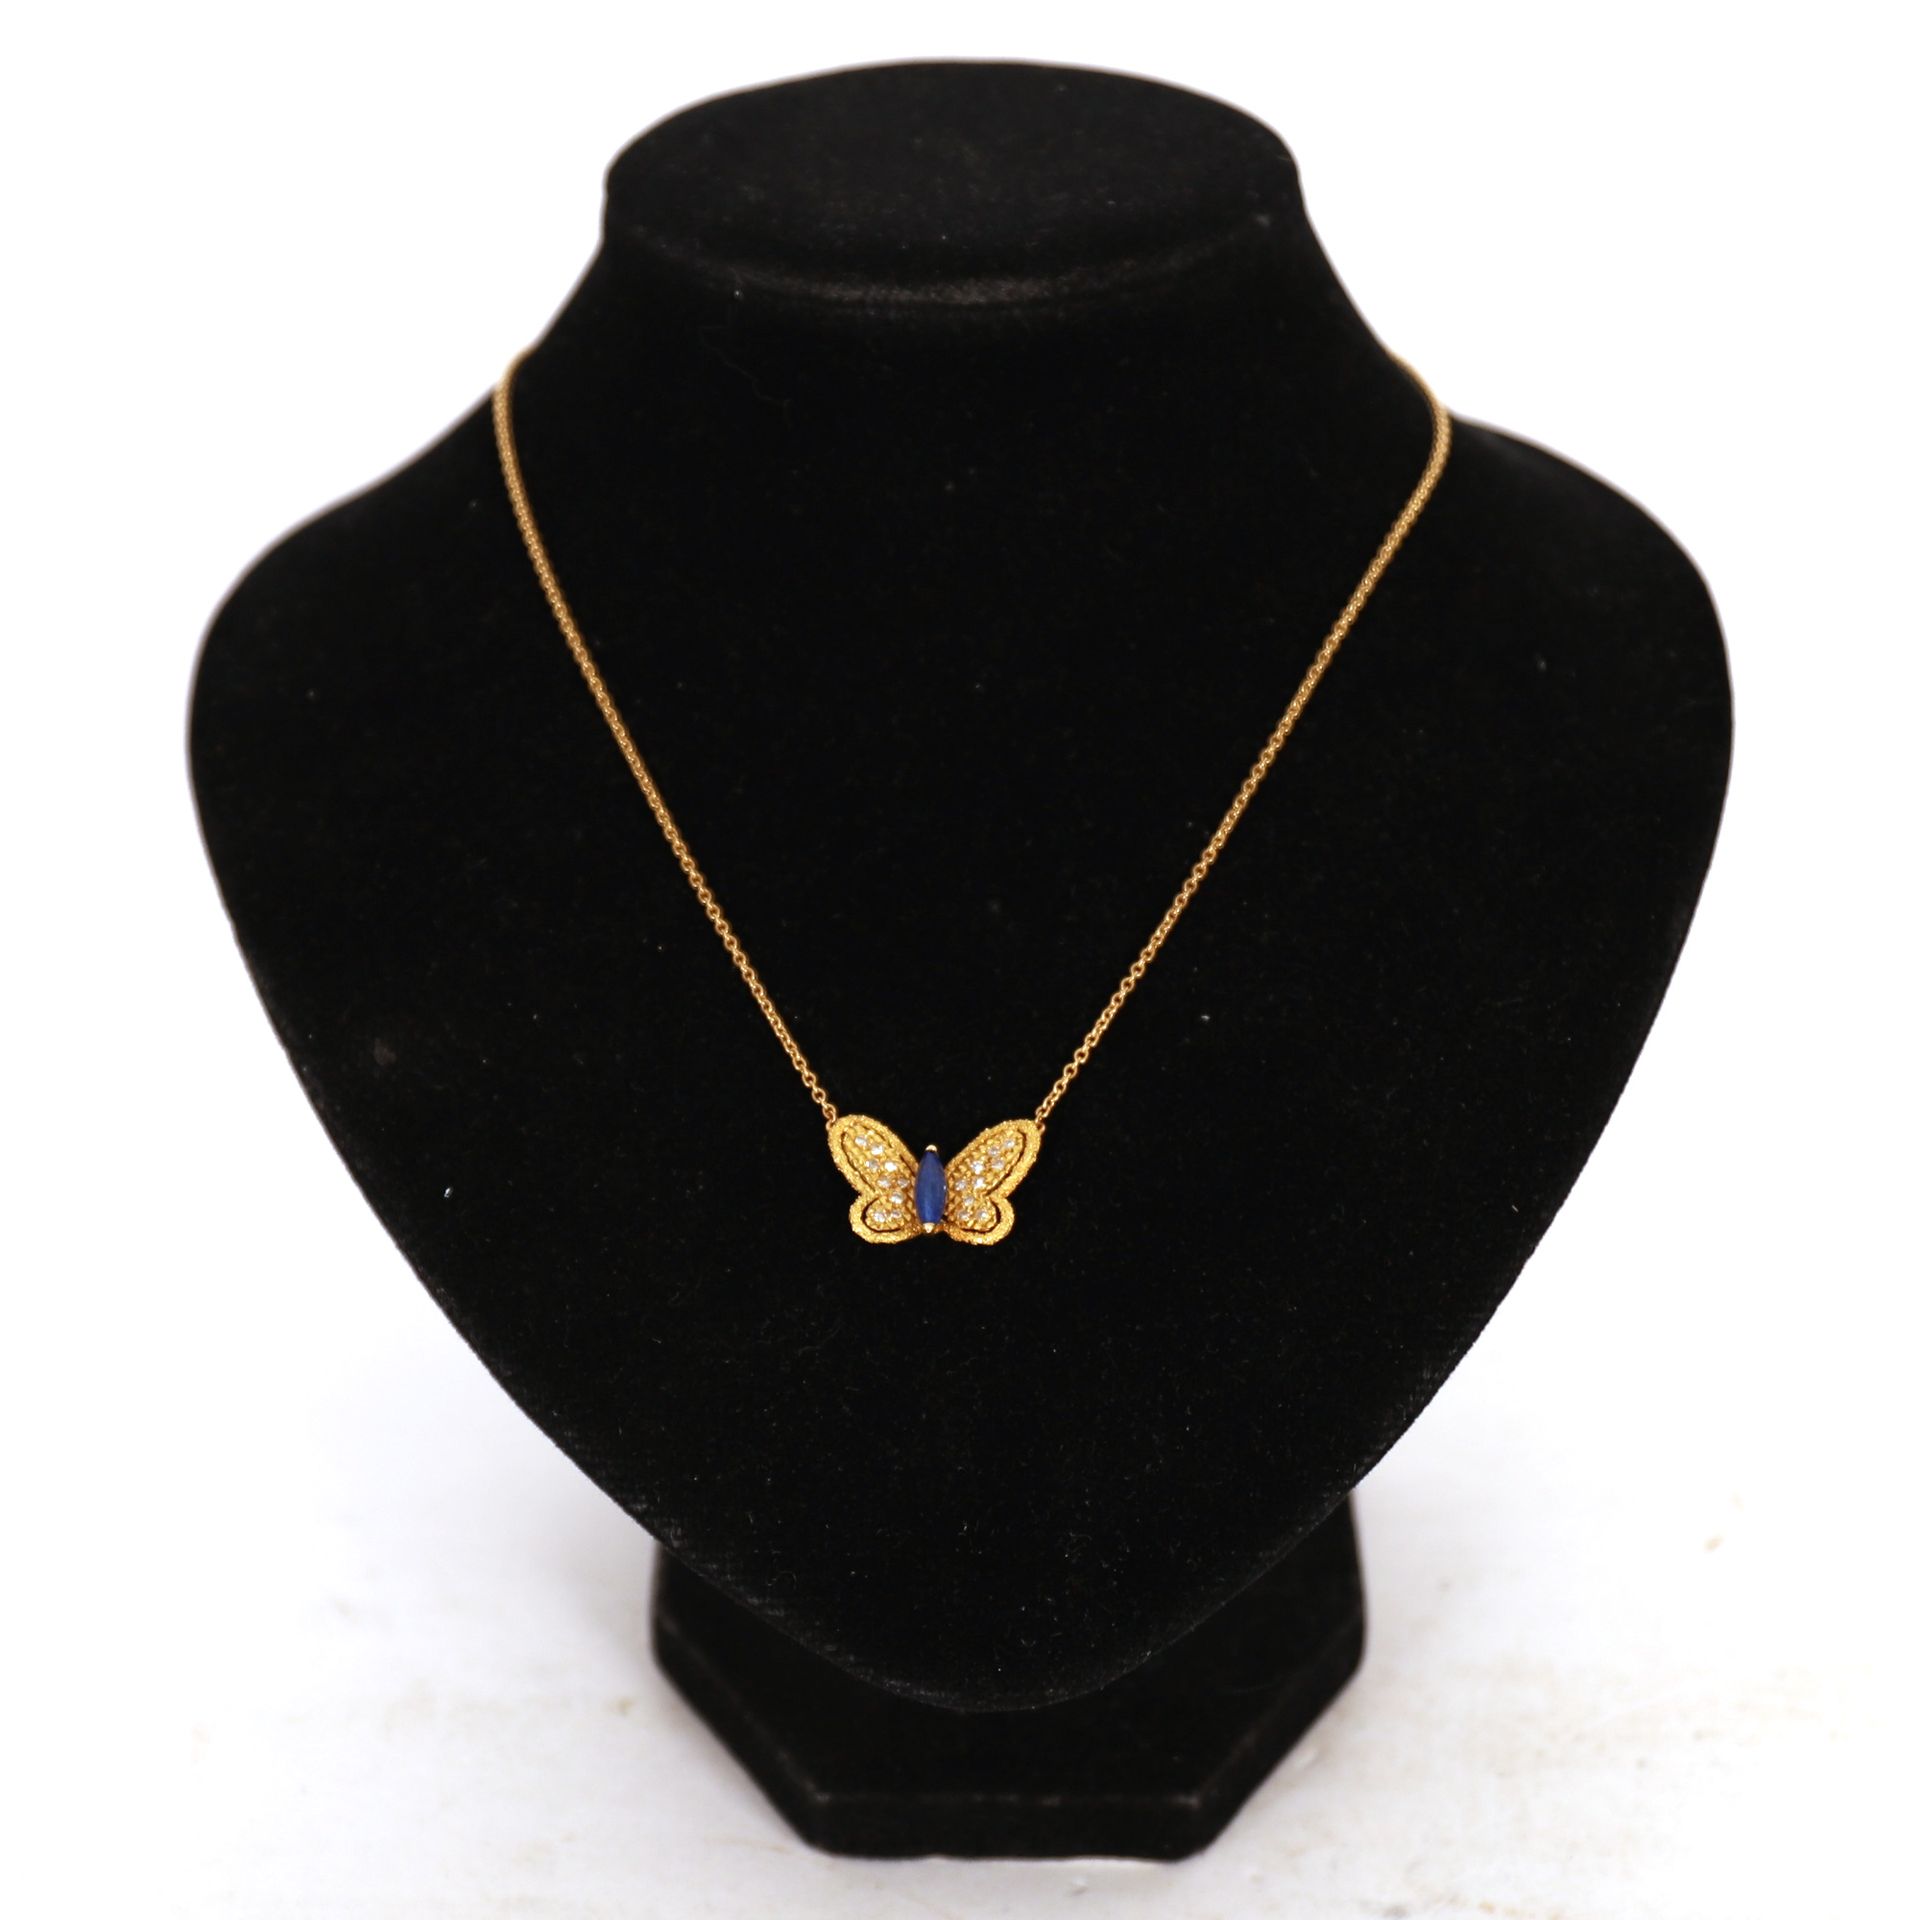 Null VINTAGE "PAPILLON" NECKLACE IN YELLOW GOLD by VAN CLEEF ARPELS

The body in&hellip;